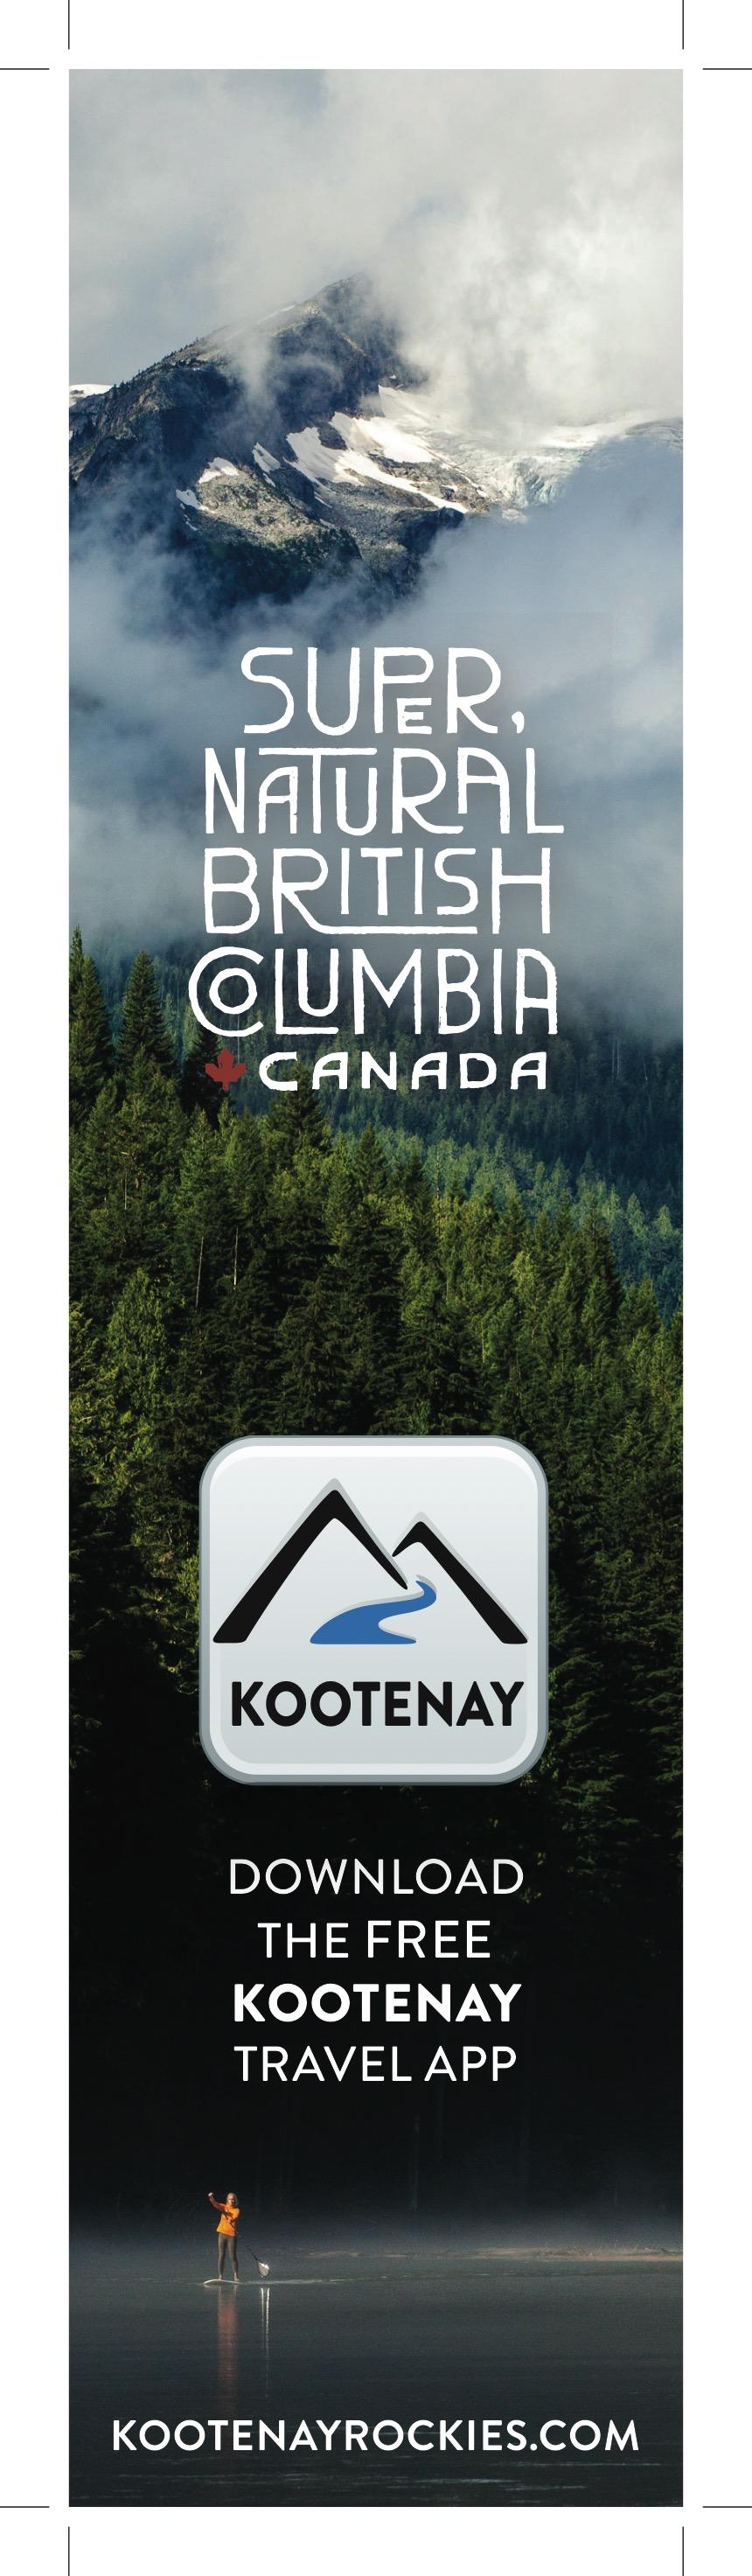 Strategies Our marketing plan includes continued promotion and enhancement of the Kootenay APP and the companion print piece Circle Route Map.